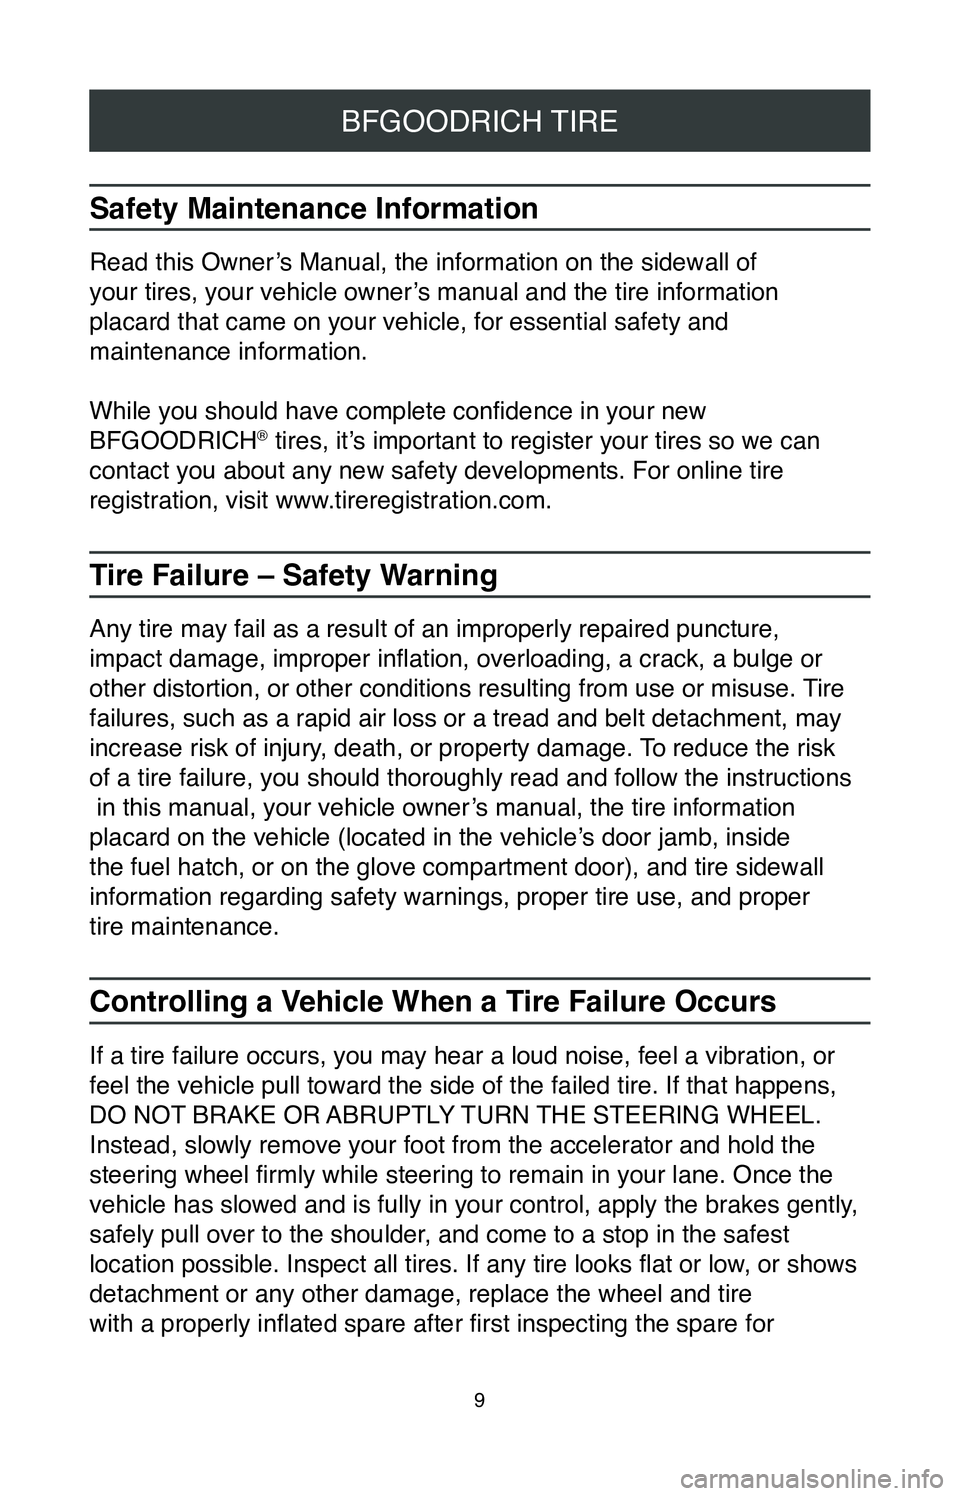 TOYOTA YARIS 2020  Warranties & Maintenance Guides (in English) 9
BFGOODRICH TIRE
Safety Maintenance Information
Read this Owner’s Manual, the information on the sidewall of  
your tires, your vehicle owner’s manual and the tire information   
placard that cam